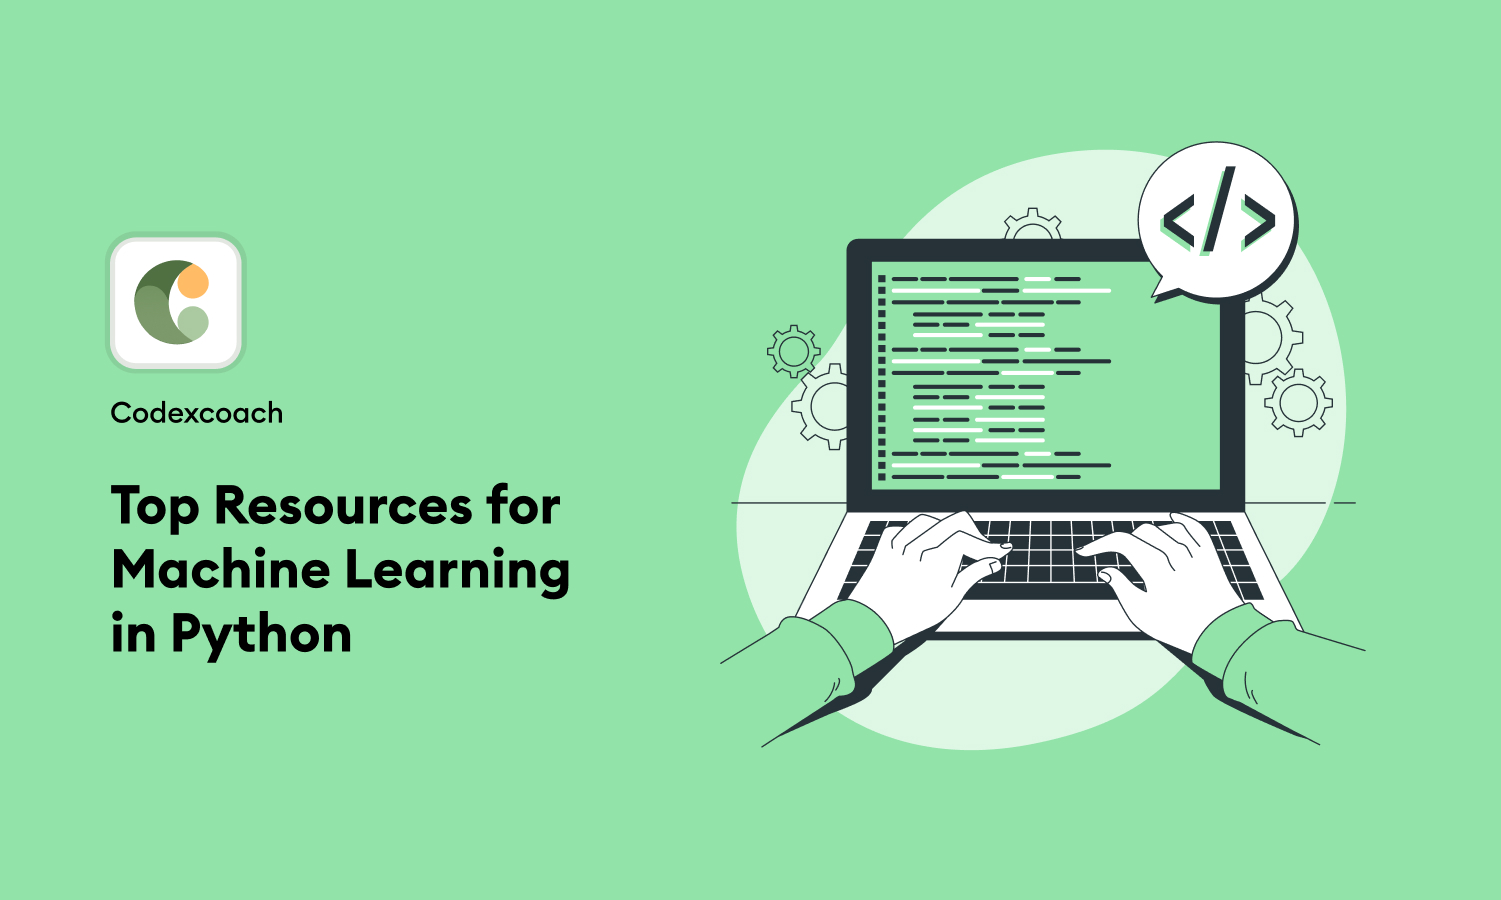 Top Resources for Machine Learning in Python